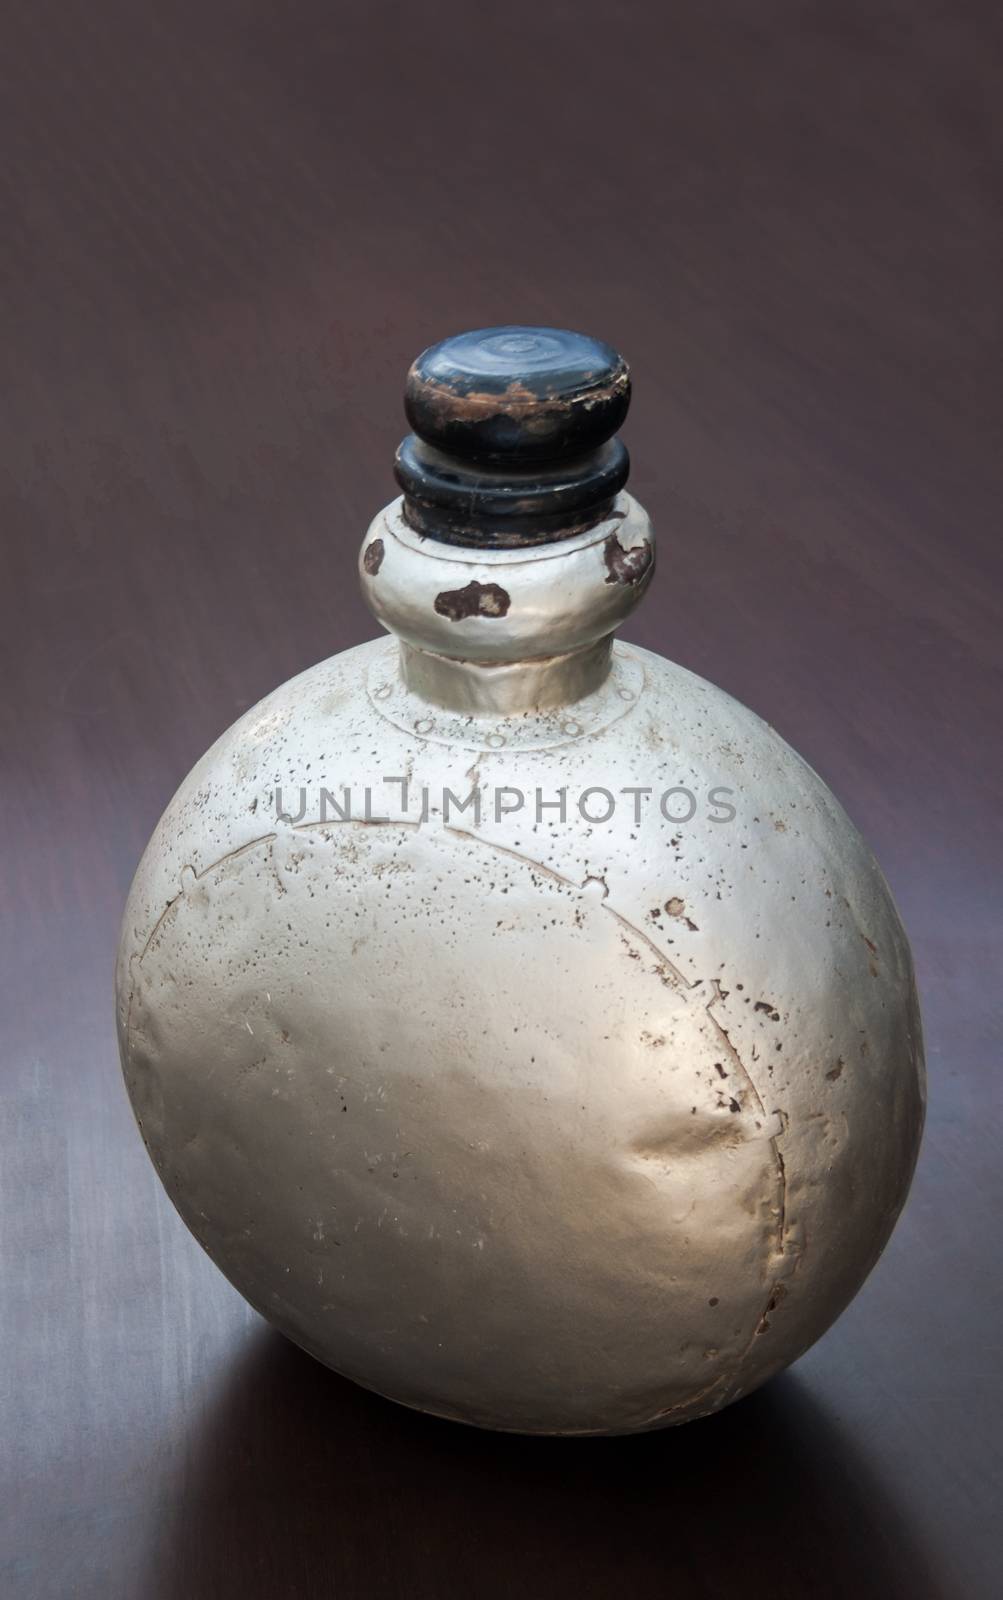 Vertical color portrait in a studio showroom interior displaying old industrial aluminum chemical bottle standing on a occasional table. A generic shot and location was Bombay India, available with property release.